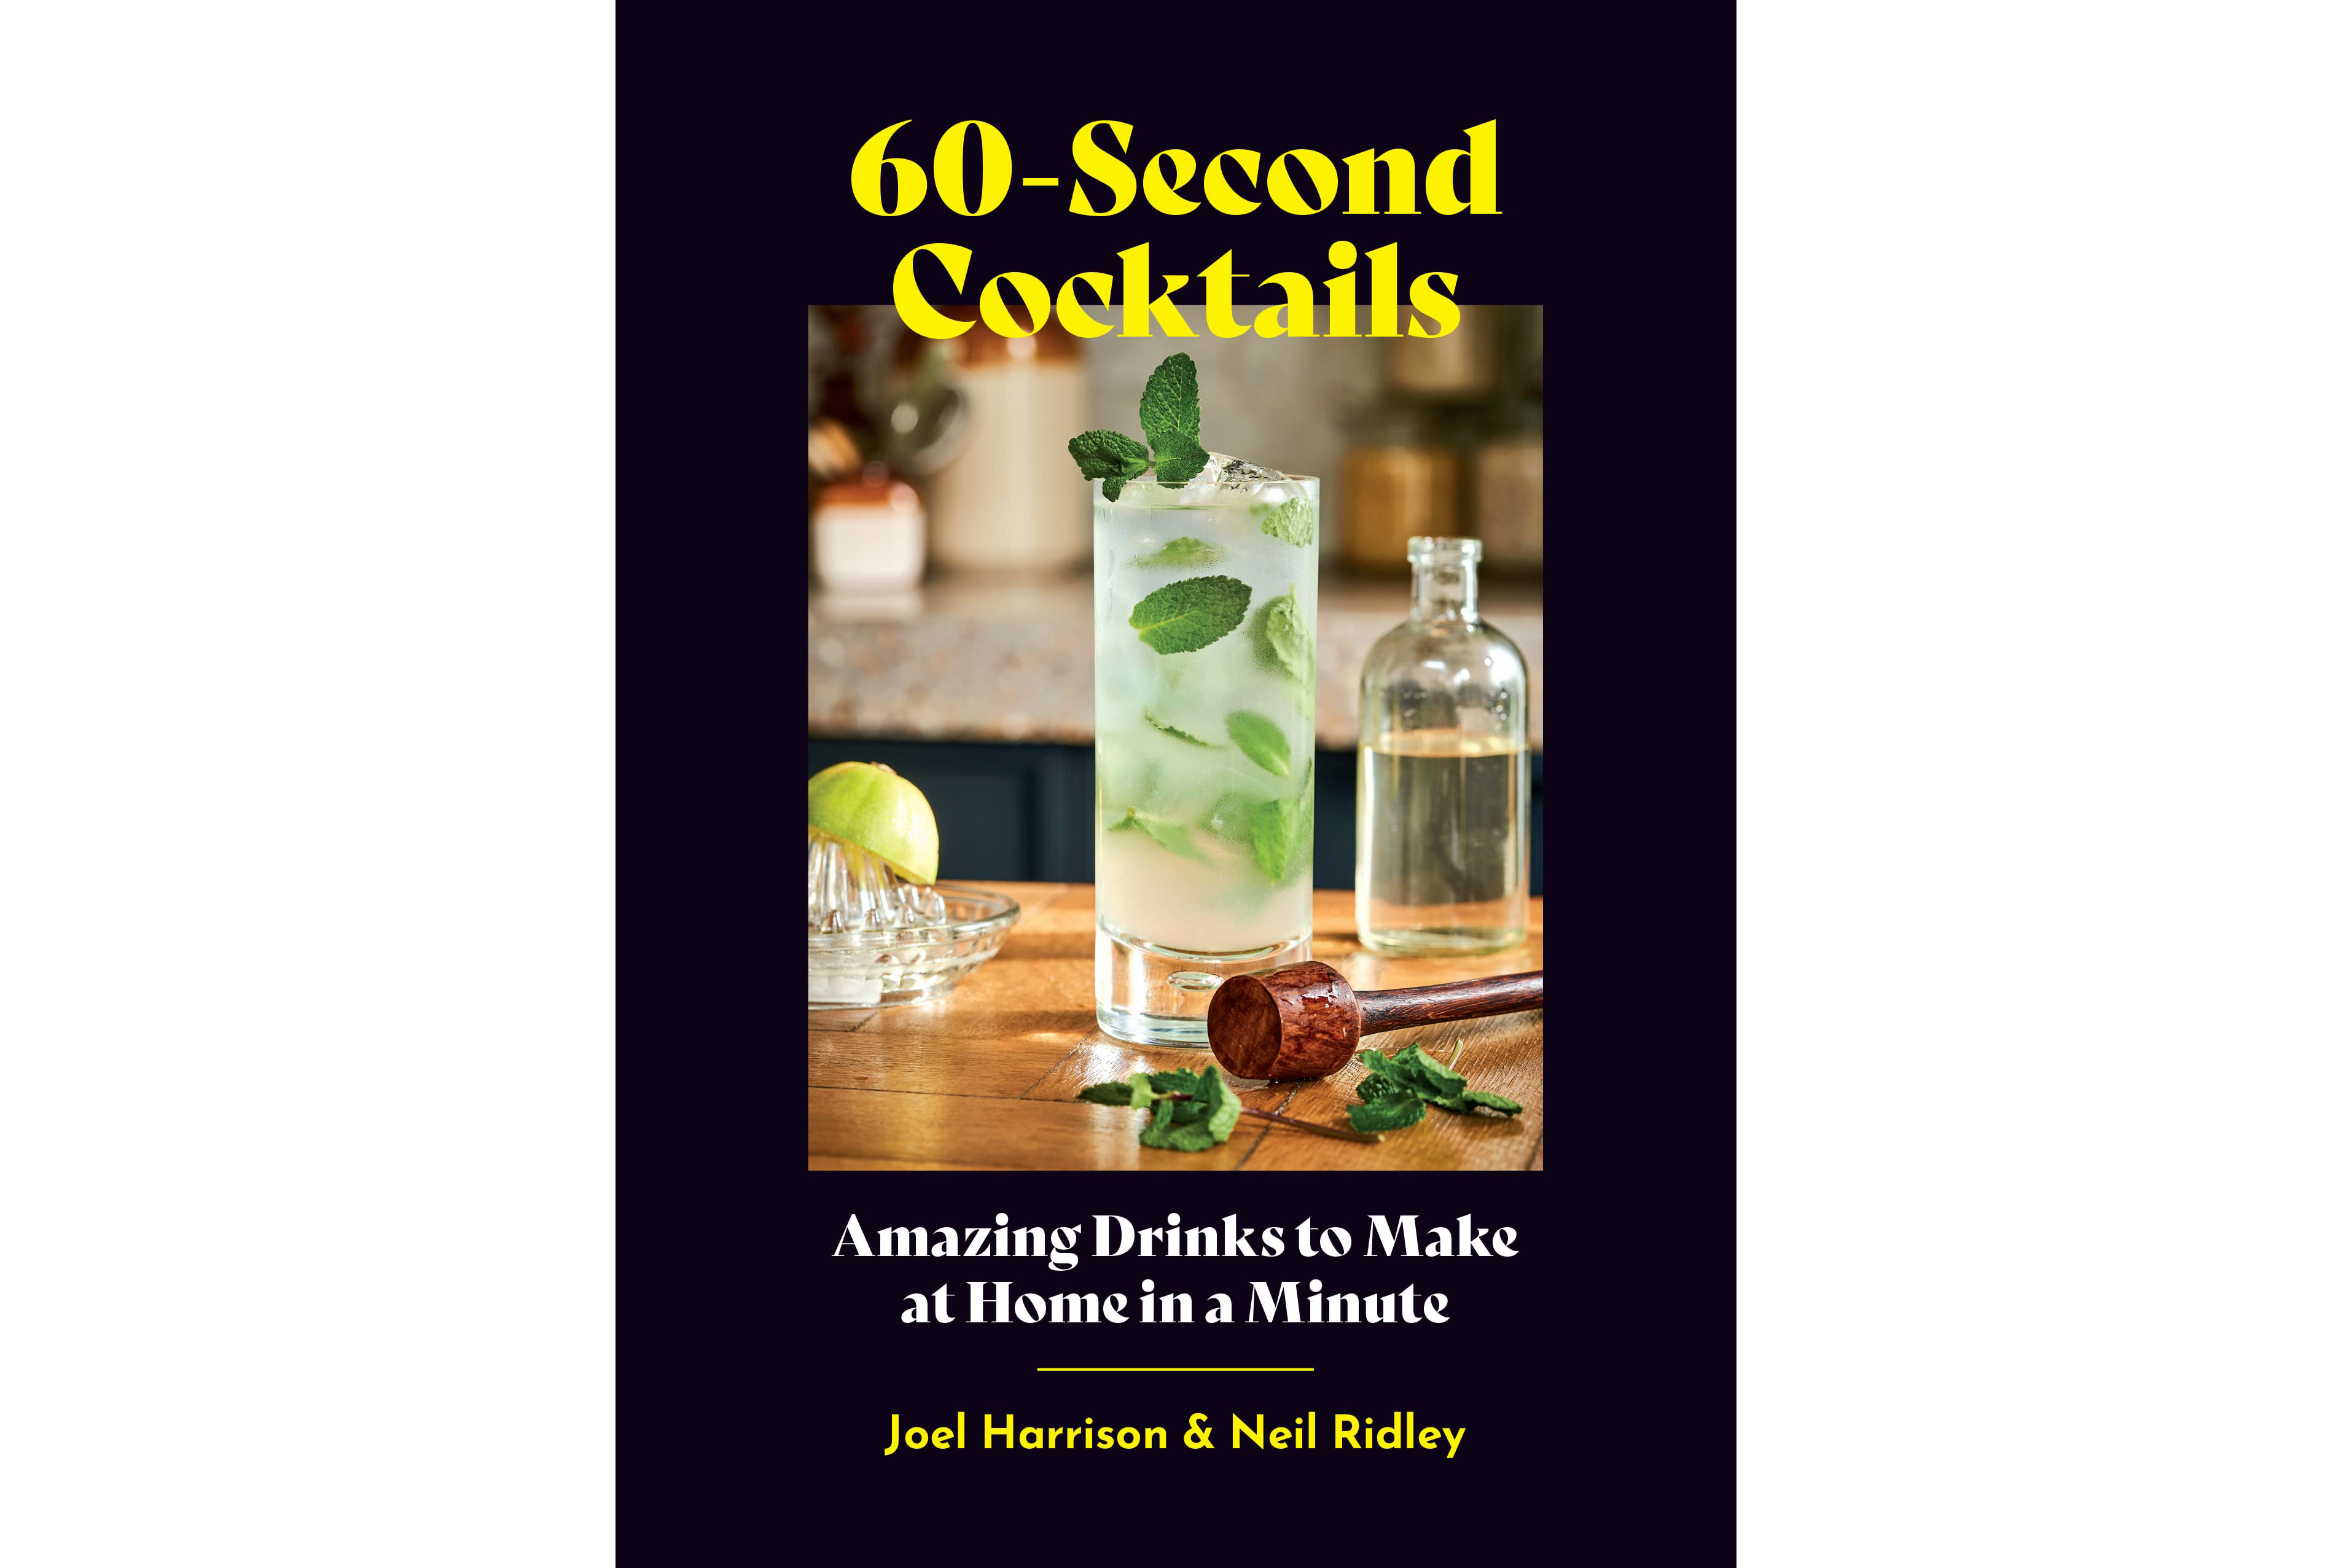 2020's Perfect Gift: Mind-Blowing Cocktails in Under a Minute